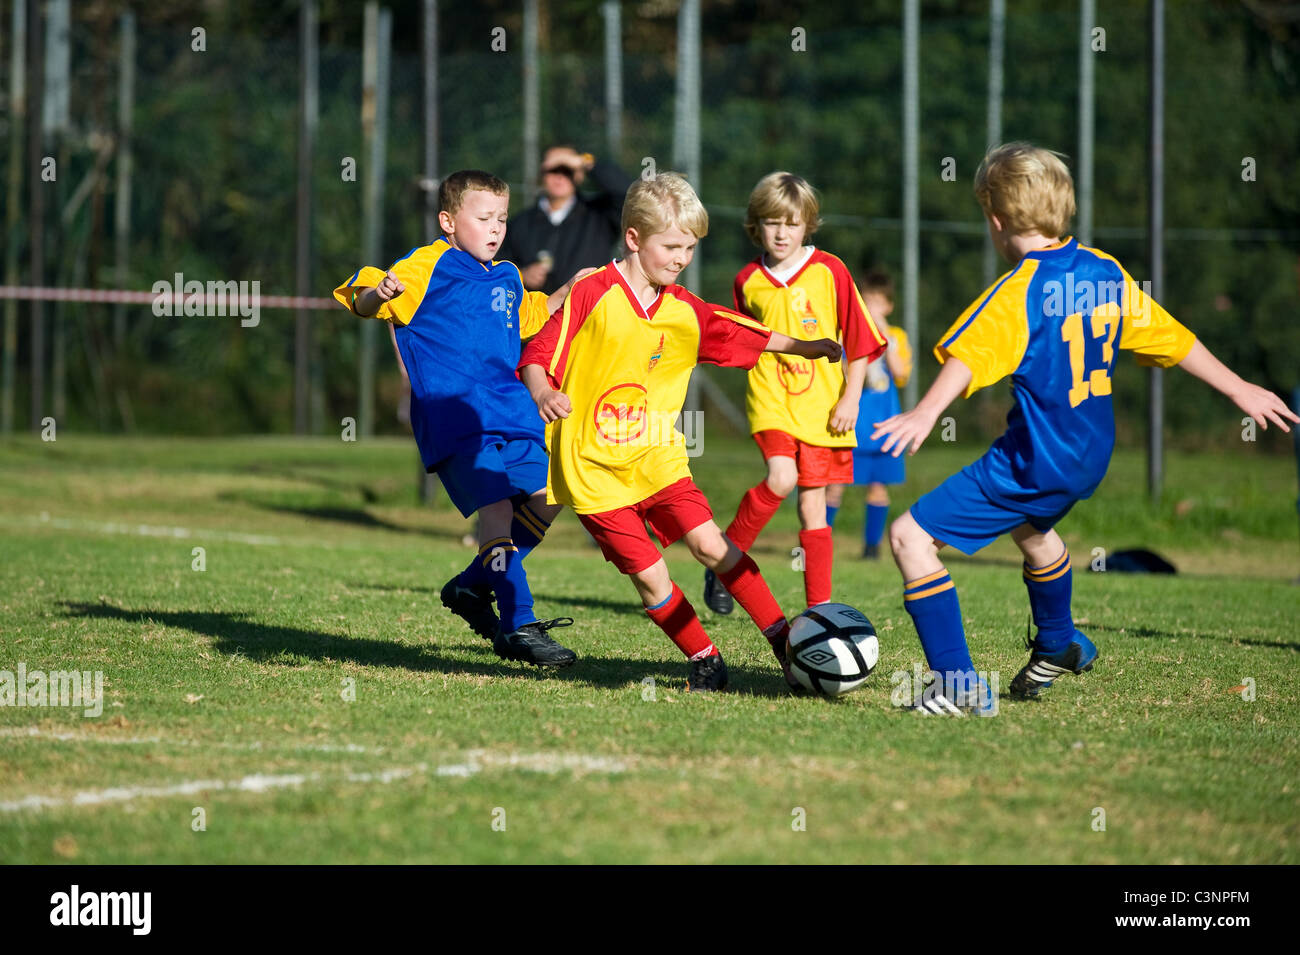 Young football players of an U9 team dribbling Cape Town South Africa Stock Photo